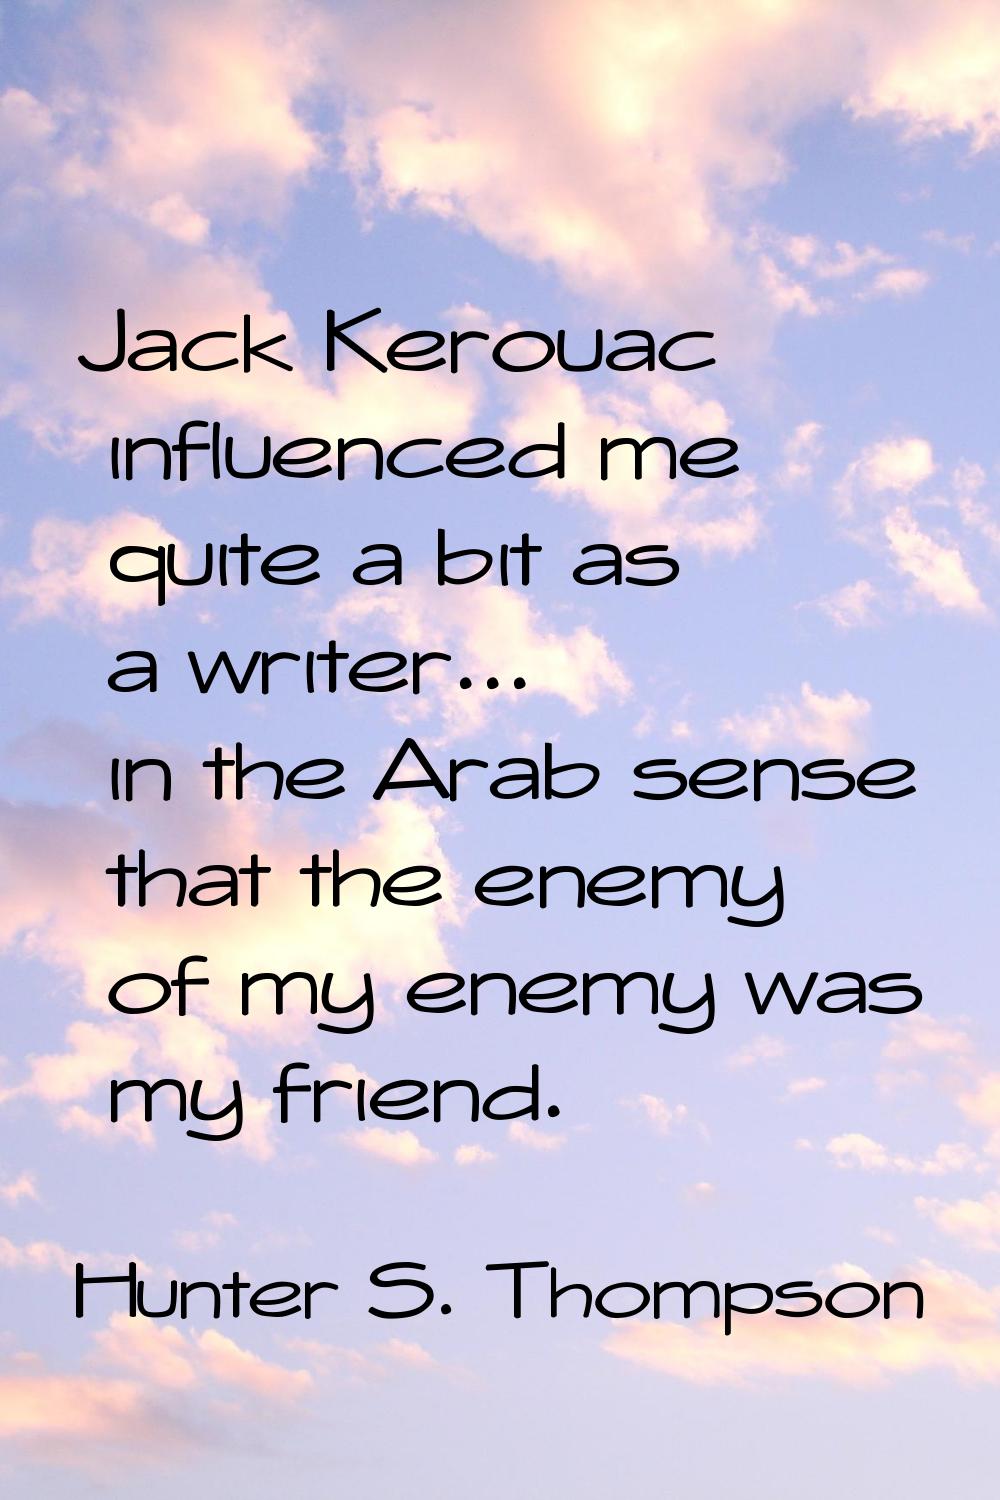 Jack Kerouac influenced me quite a bit as a writer... in the Arab sense that the enemy of my enemy 